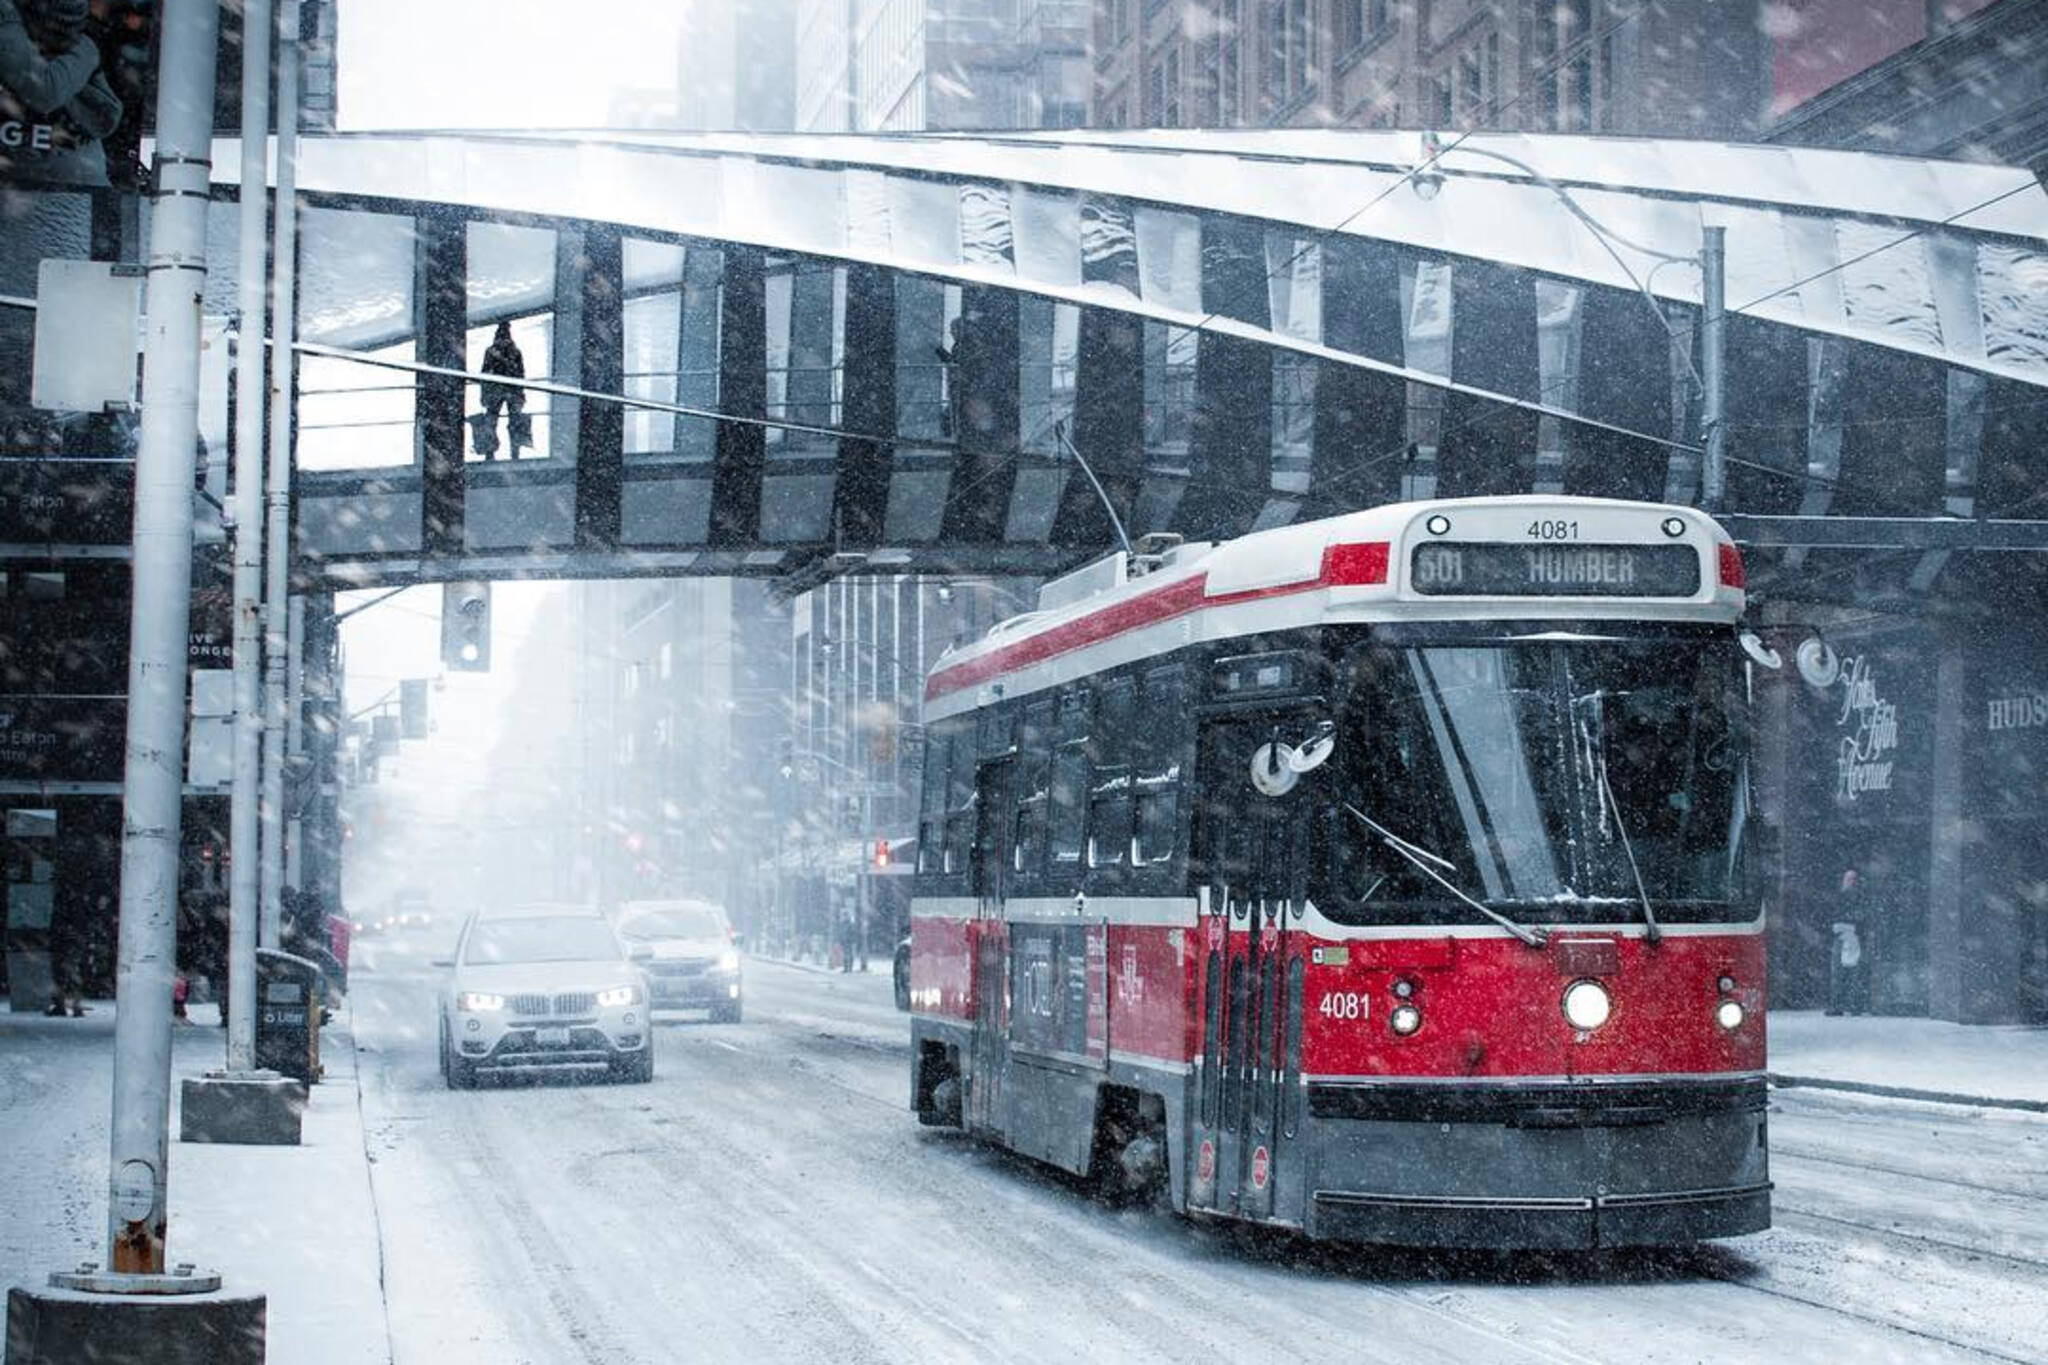 Massive snowfall in Toronto causing widespread cancellations and messy